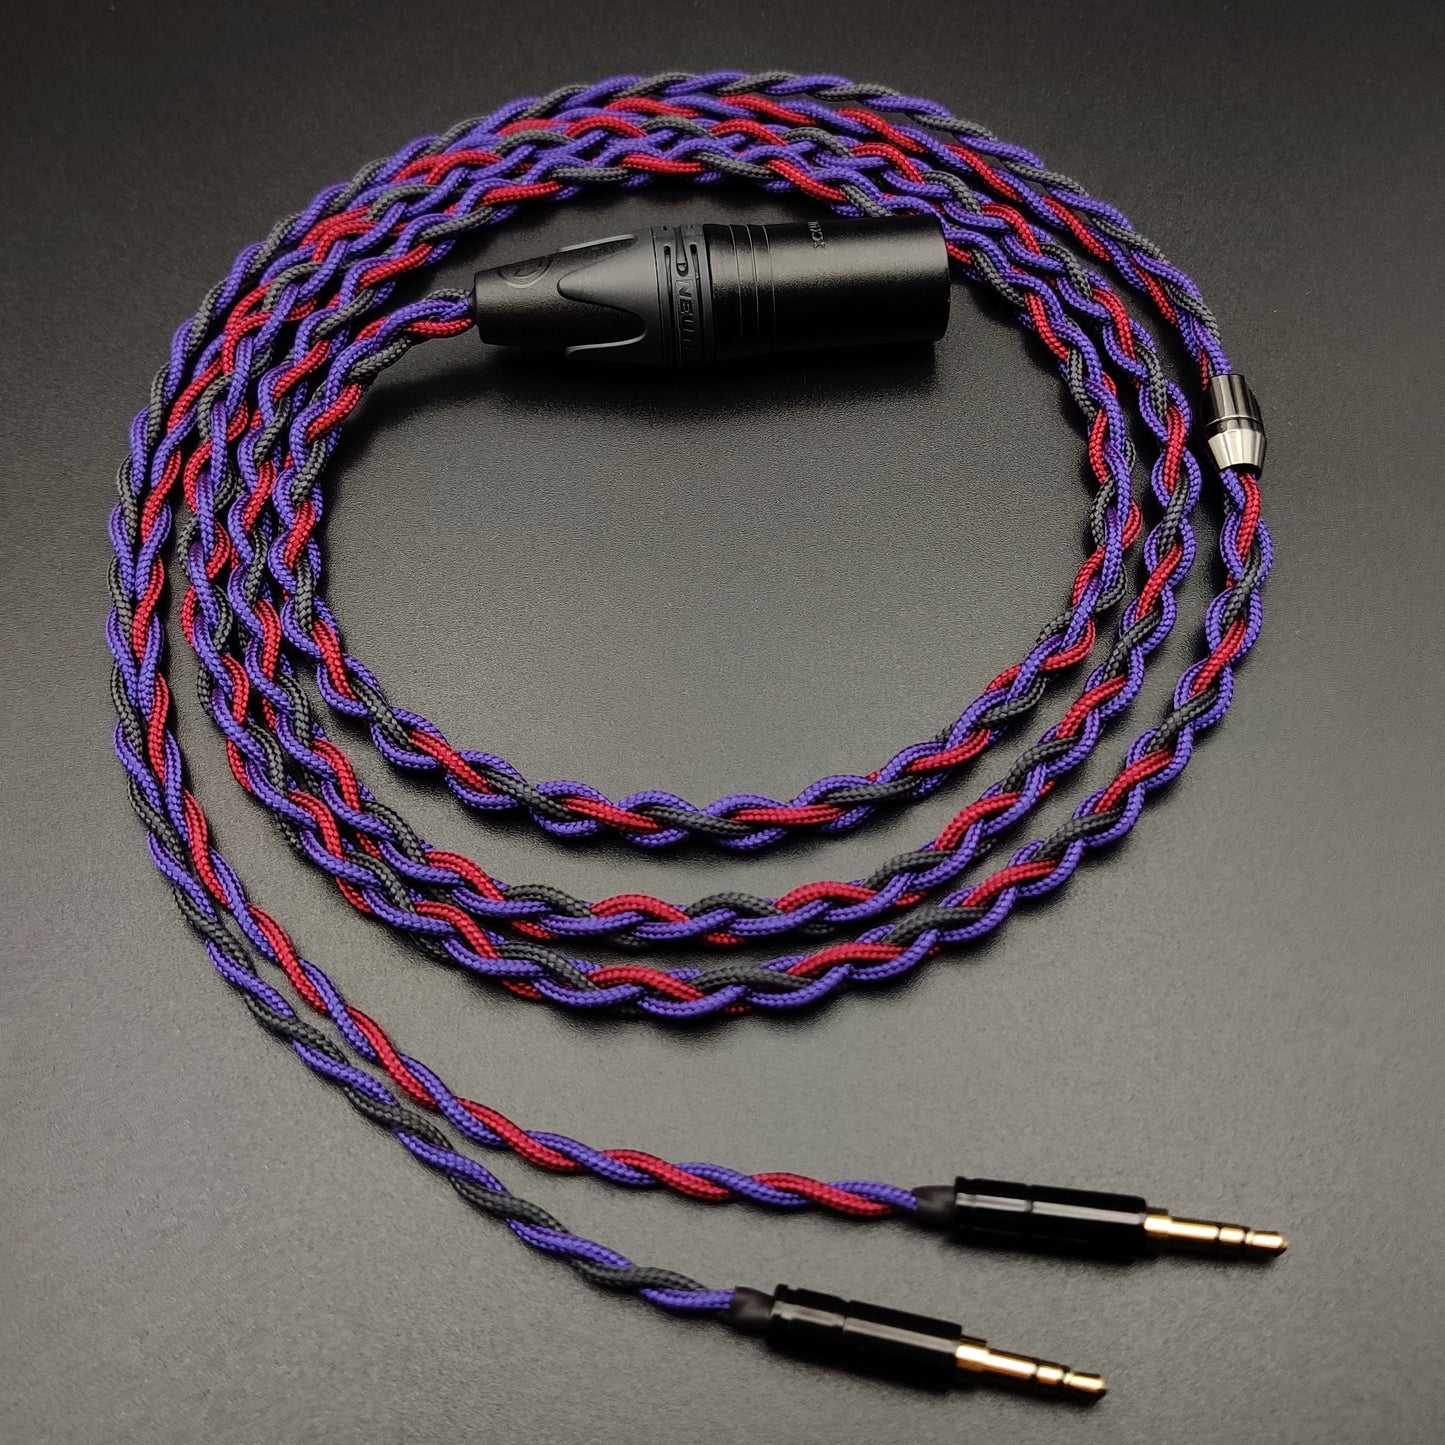 Dual 3.5mm Headphone Cable - Braided sleeved